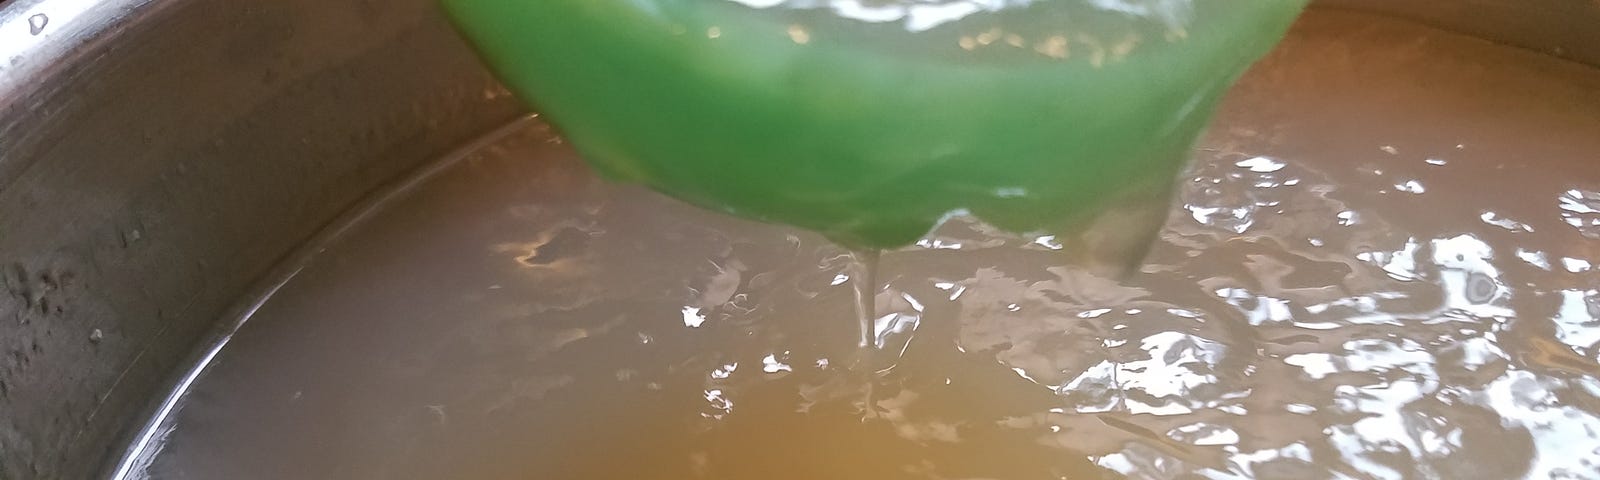 Close up photo of a pot with gelatinous poultry stock and a green ladle filled with stock just over it.